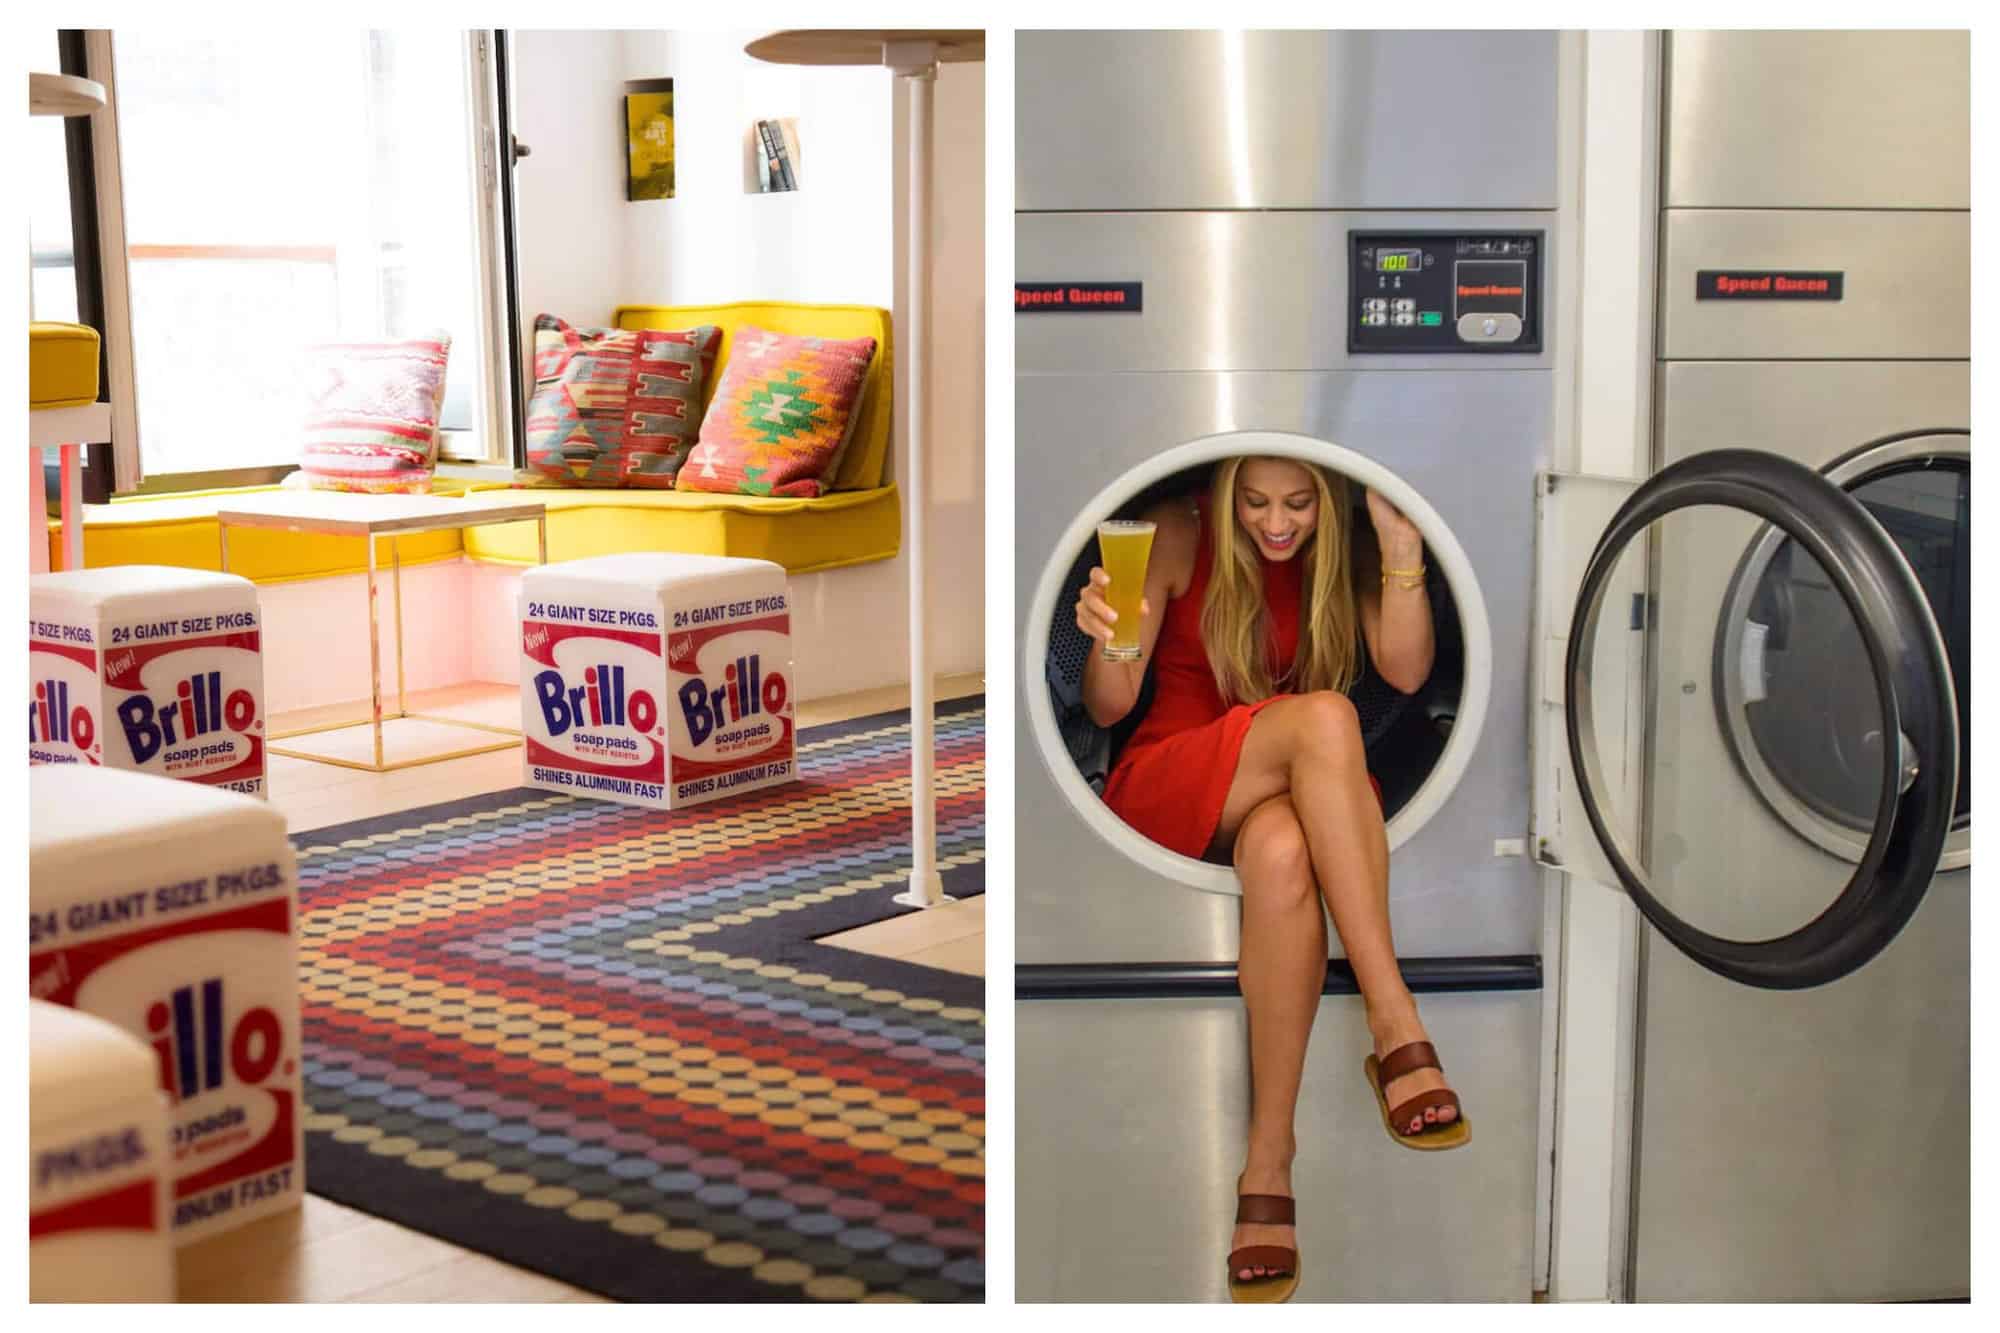 Left: the interior of the bar in Paris "Lavomatic." There are colorful cushions and pillows on several benches. There are large stools made to look like a Brillo Pad box. Right: A woman wearing a red dress and sandals sitting inside a washing machine with a cocktail in her hand. She is smiling but not looking at the camera.